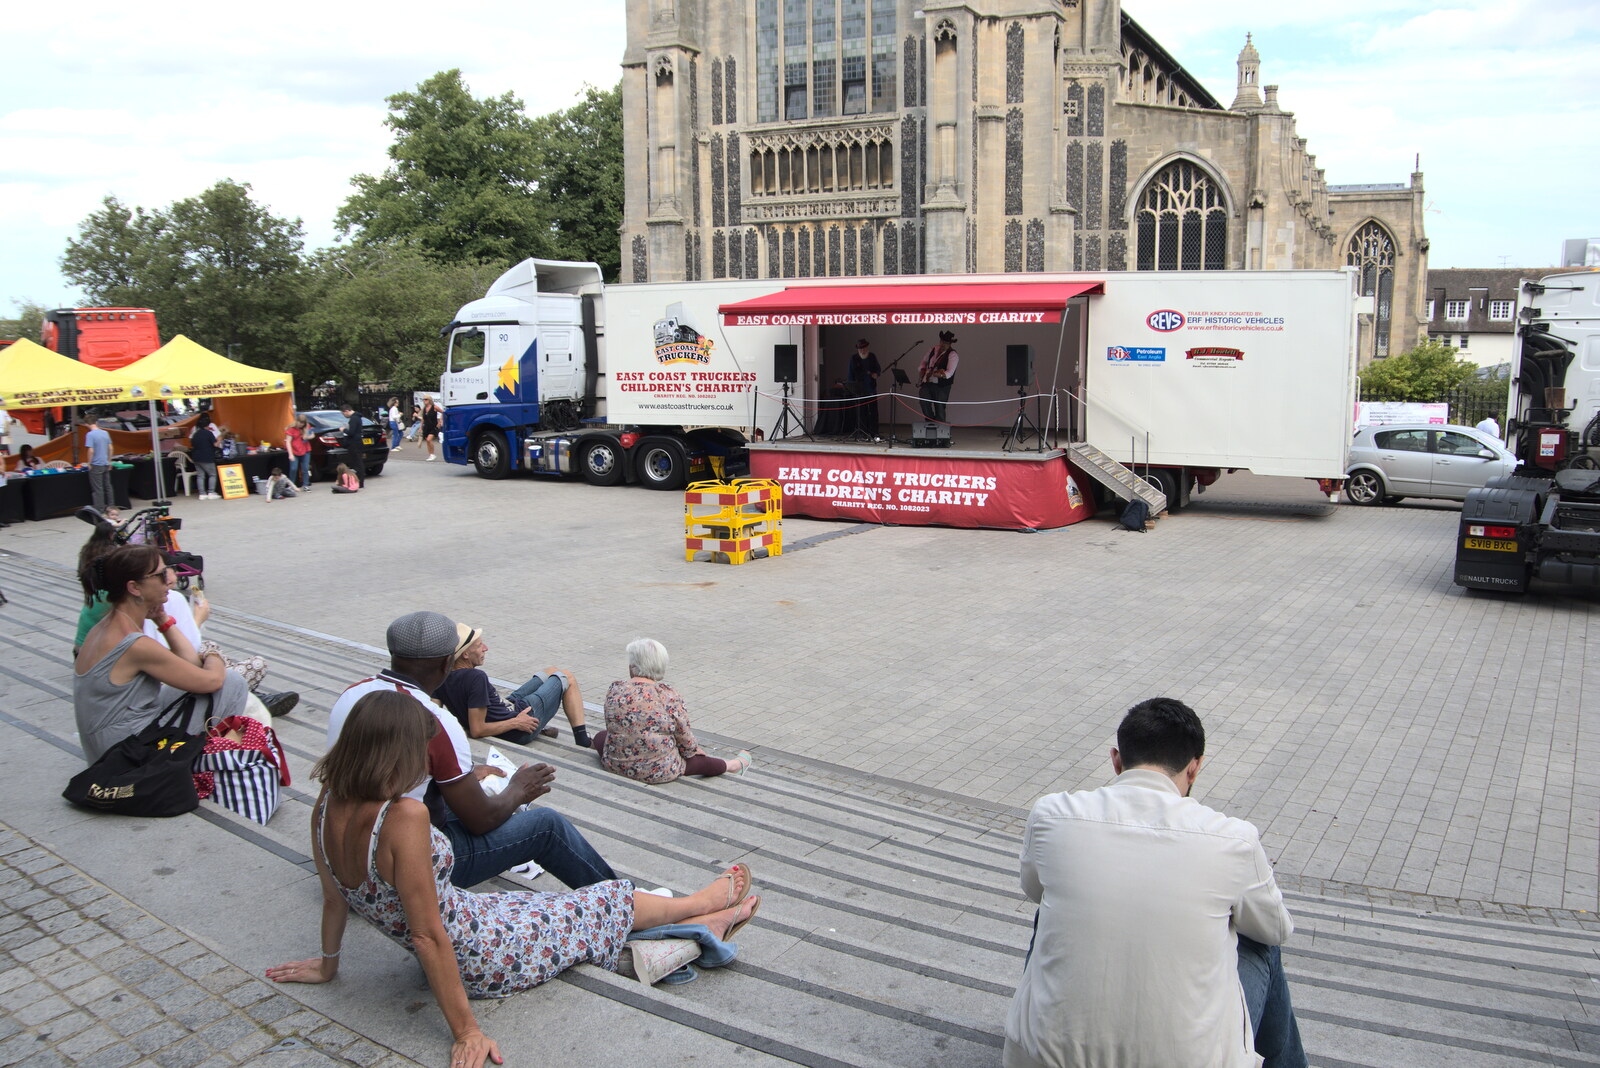 A July Miscellany, Diss, Eye and Norwich - 23rd July 2022: A small crowd listens to country music